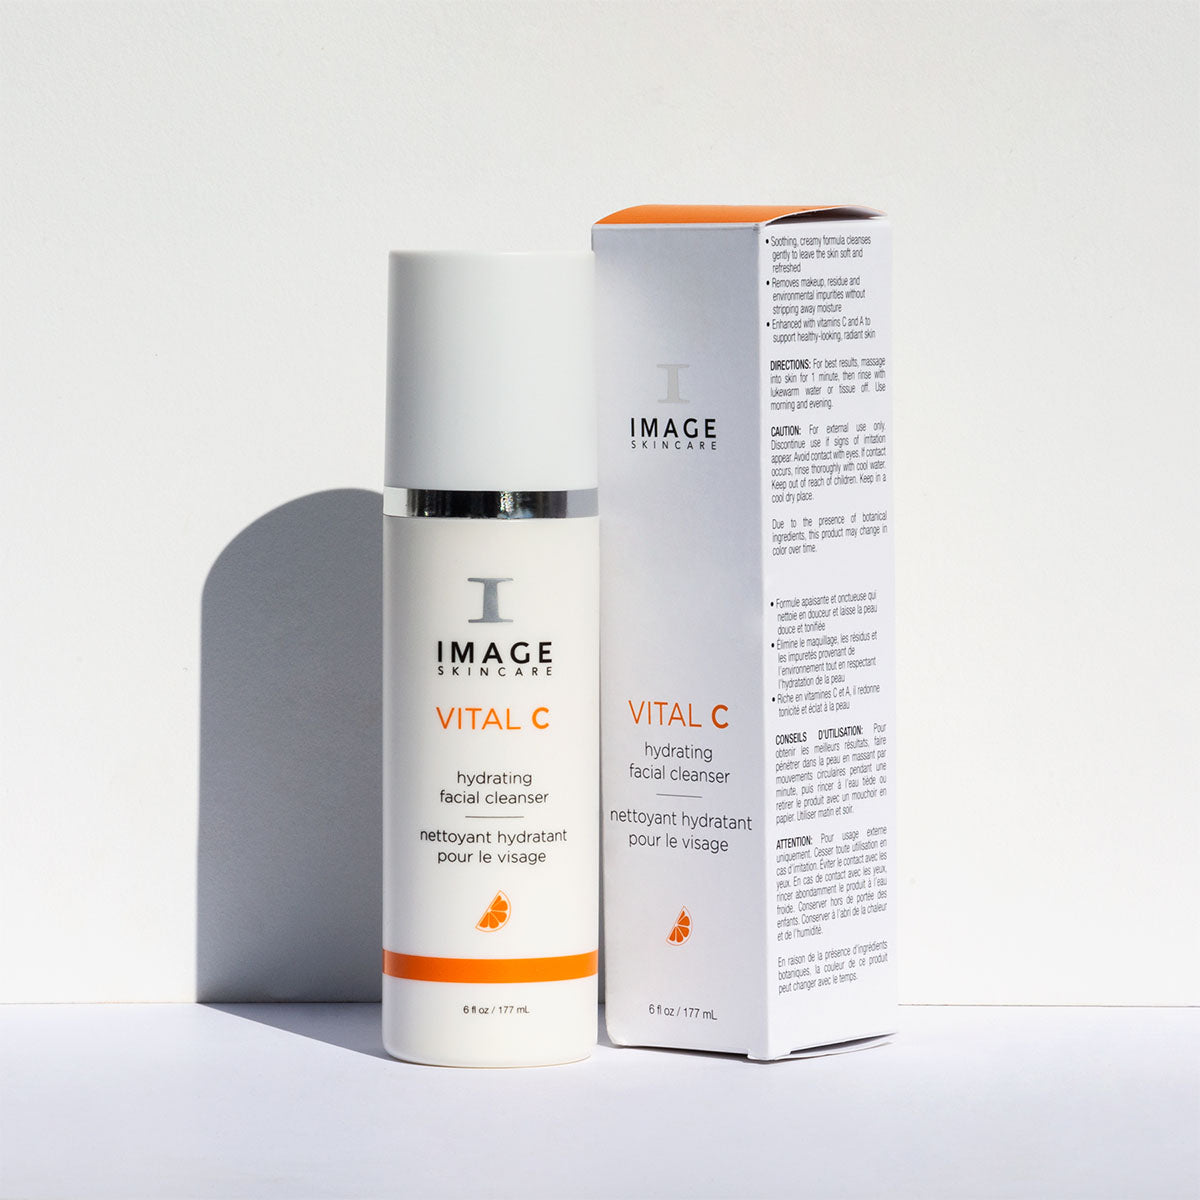 VITAL C hydrating facial cleanser | IMAGE Skincare